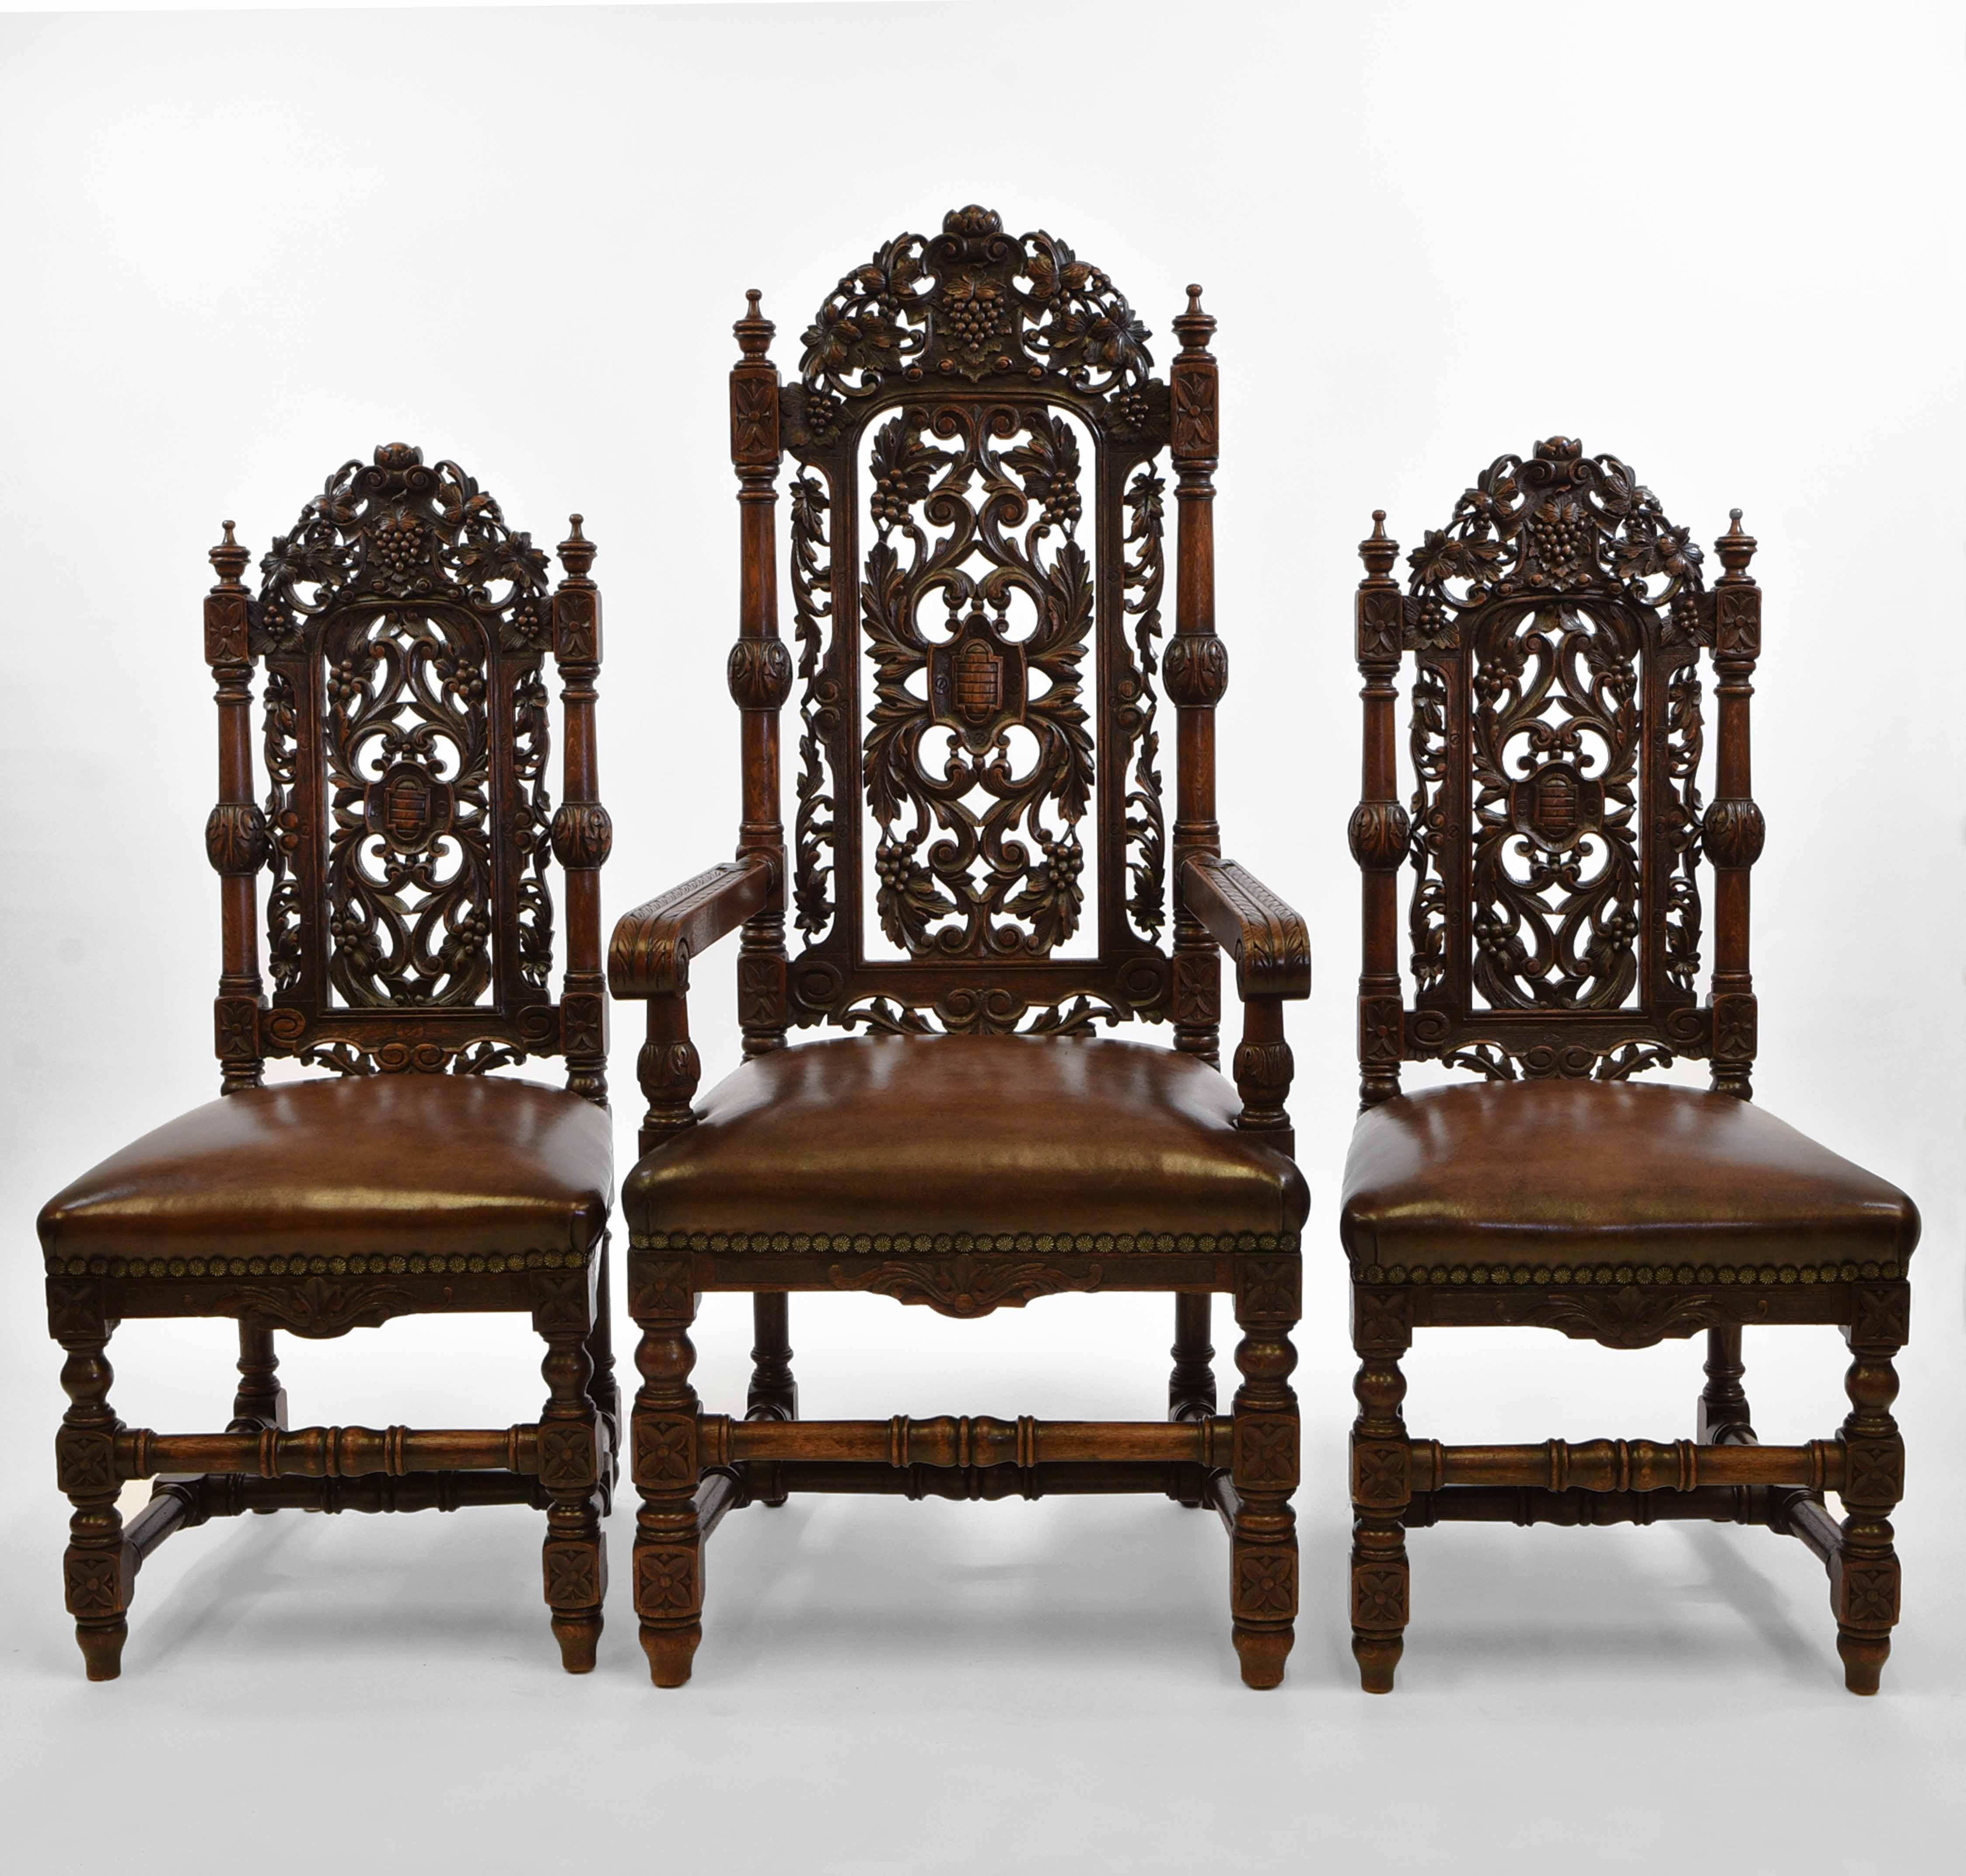 An exceptional set of eight English Victorian carved oak dining chairs with leather seating. Maker's label 'Hewetsons Tottenham Court Rd London.' Circa 1890.

The set consists of two armchairs and six single chairs. They are of excellent quality,